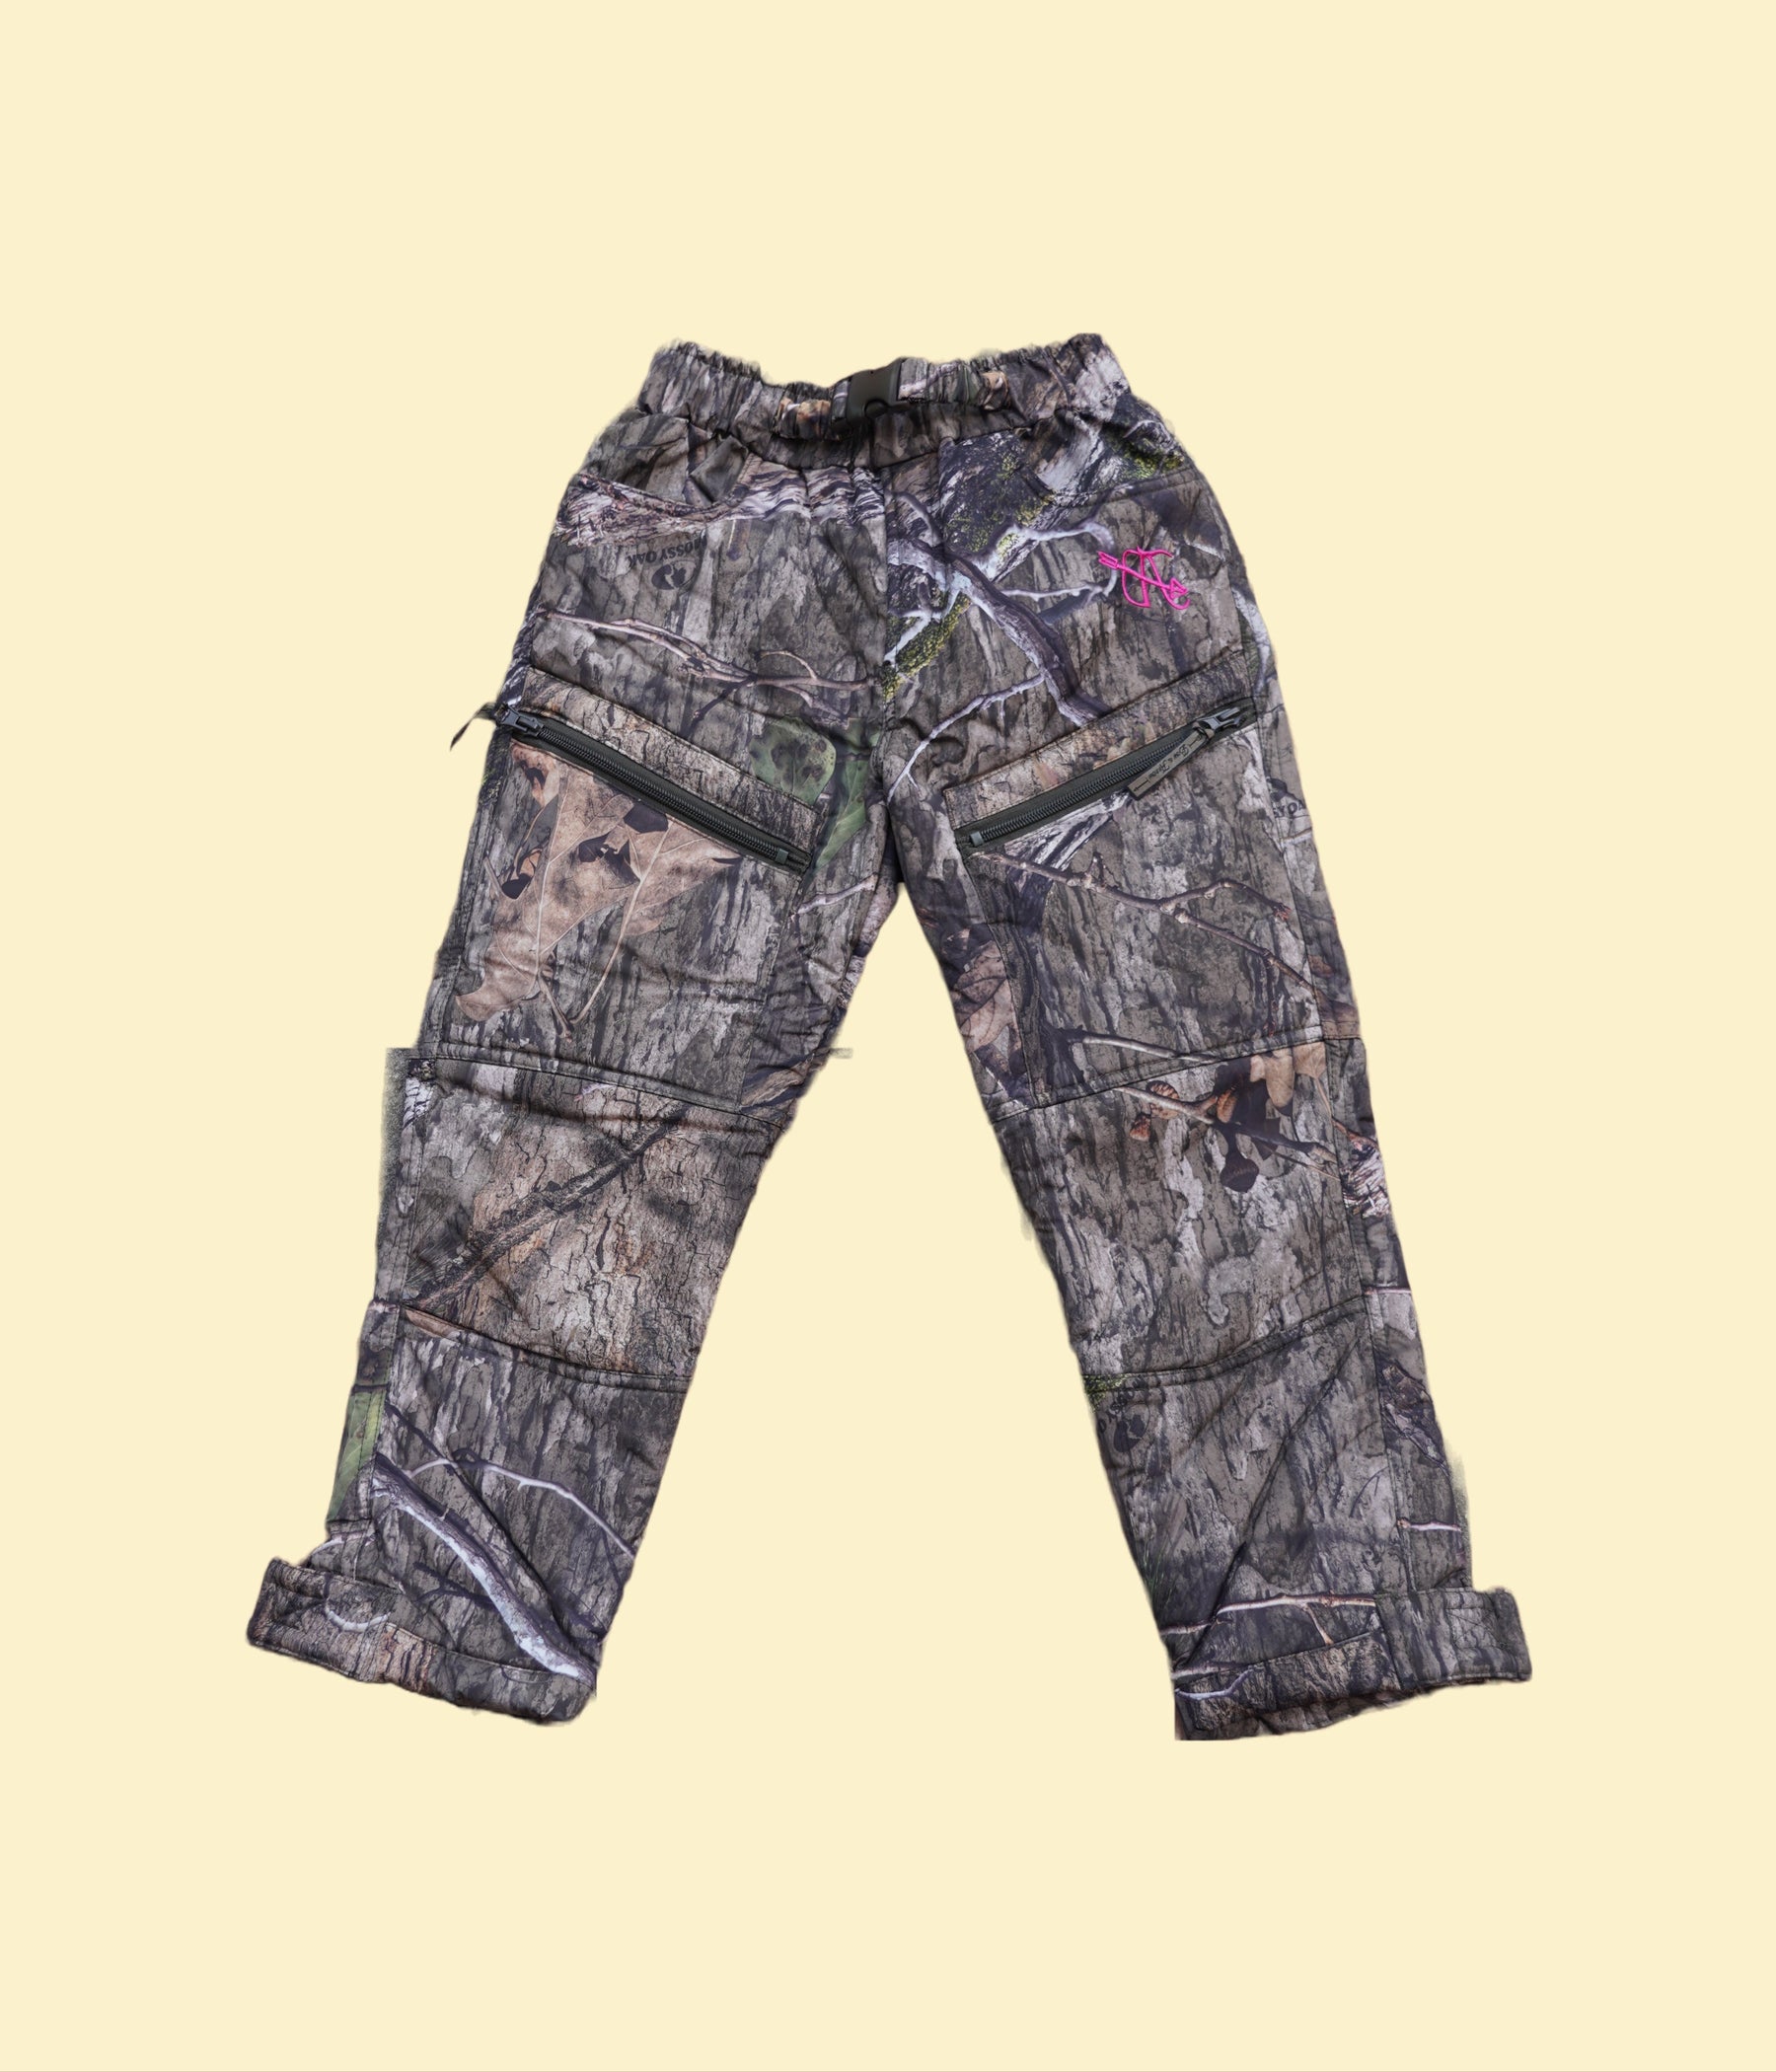 Heavy Weight Hunting Pant by Bow and Arrow Outdoors - Sportsman Gear